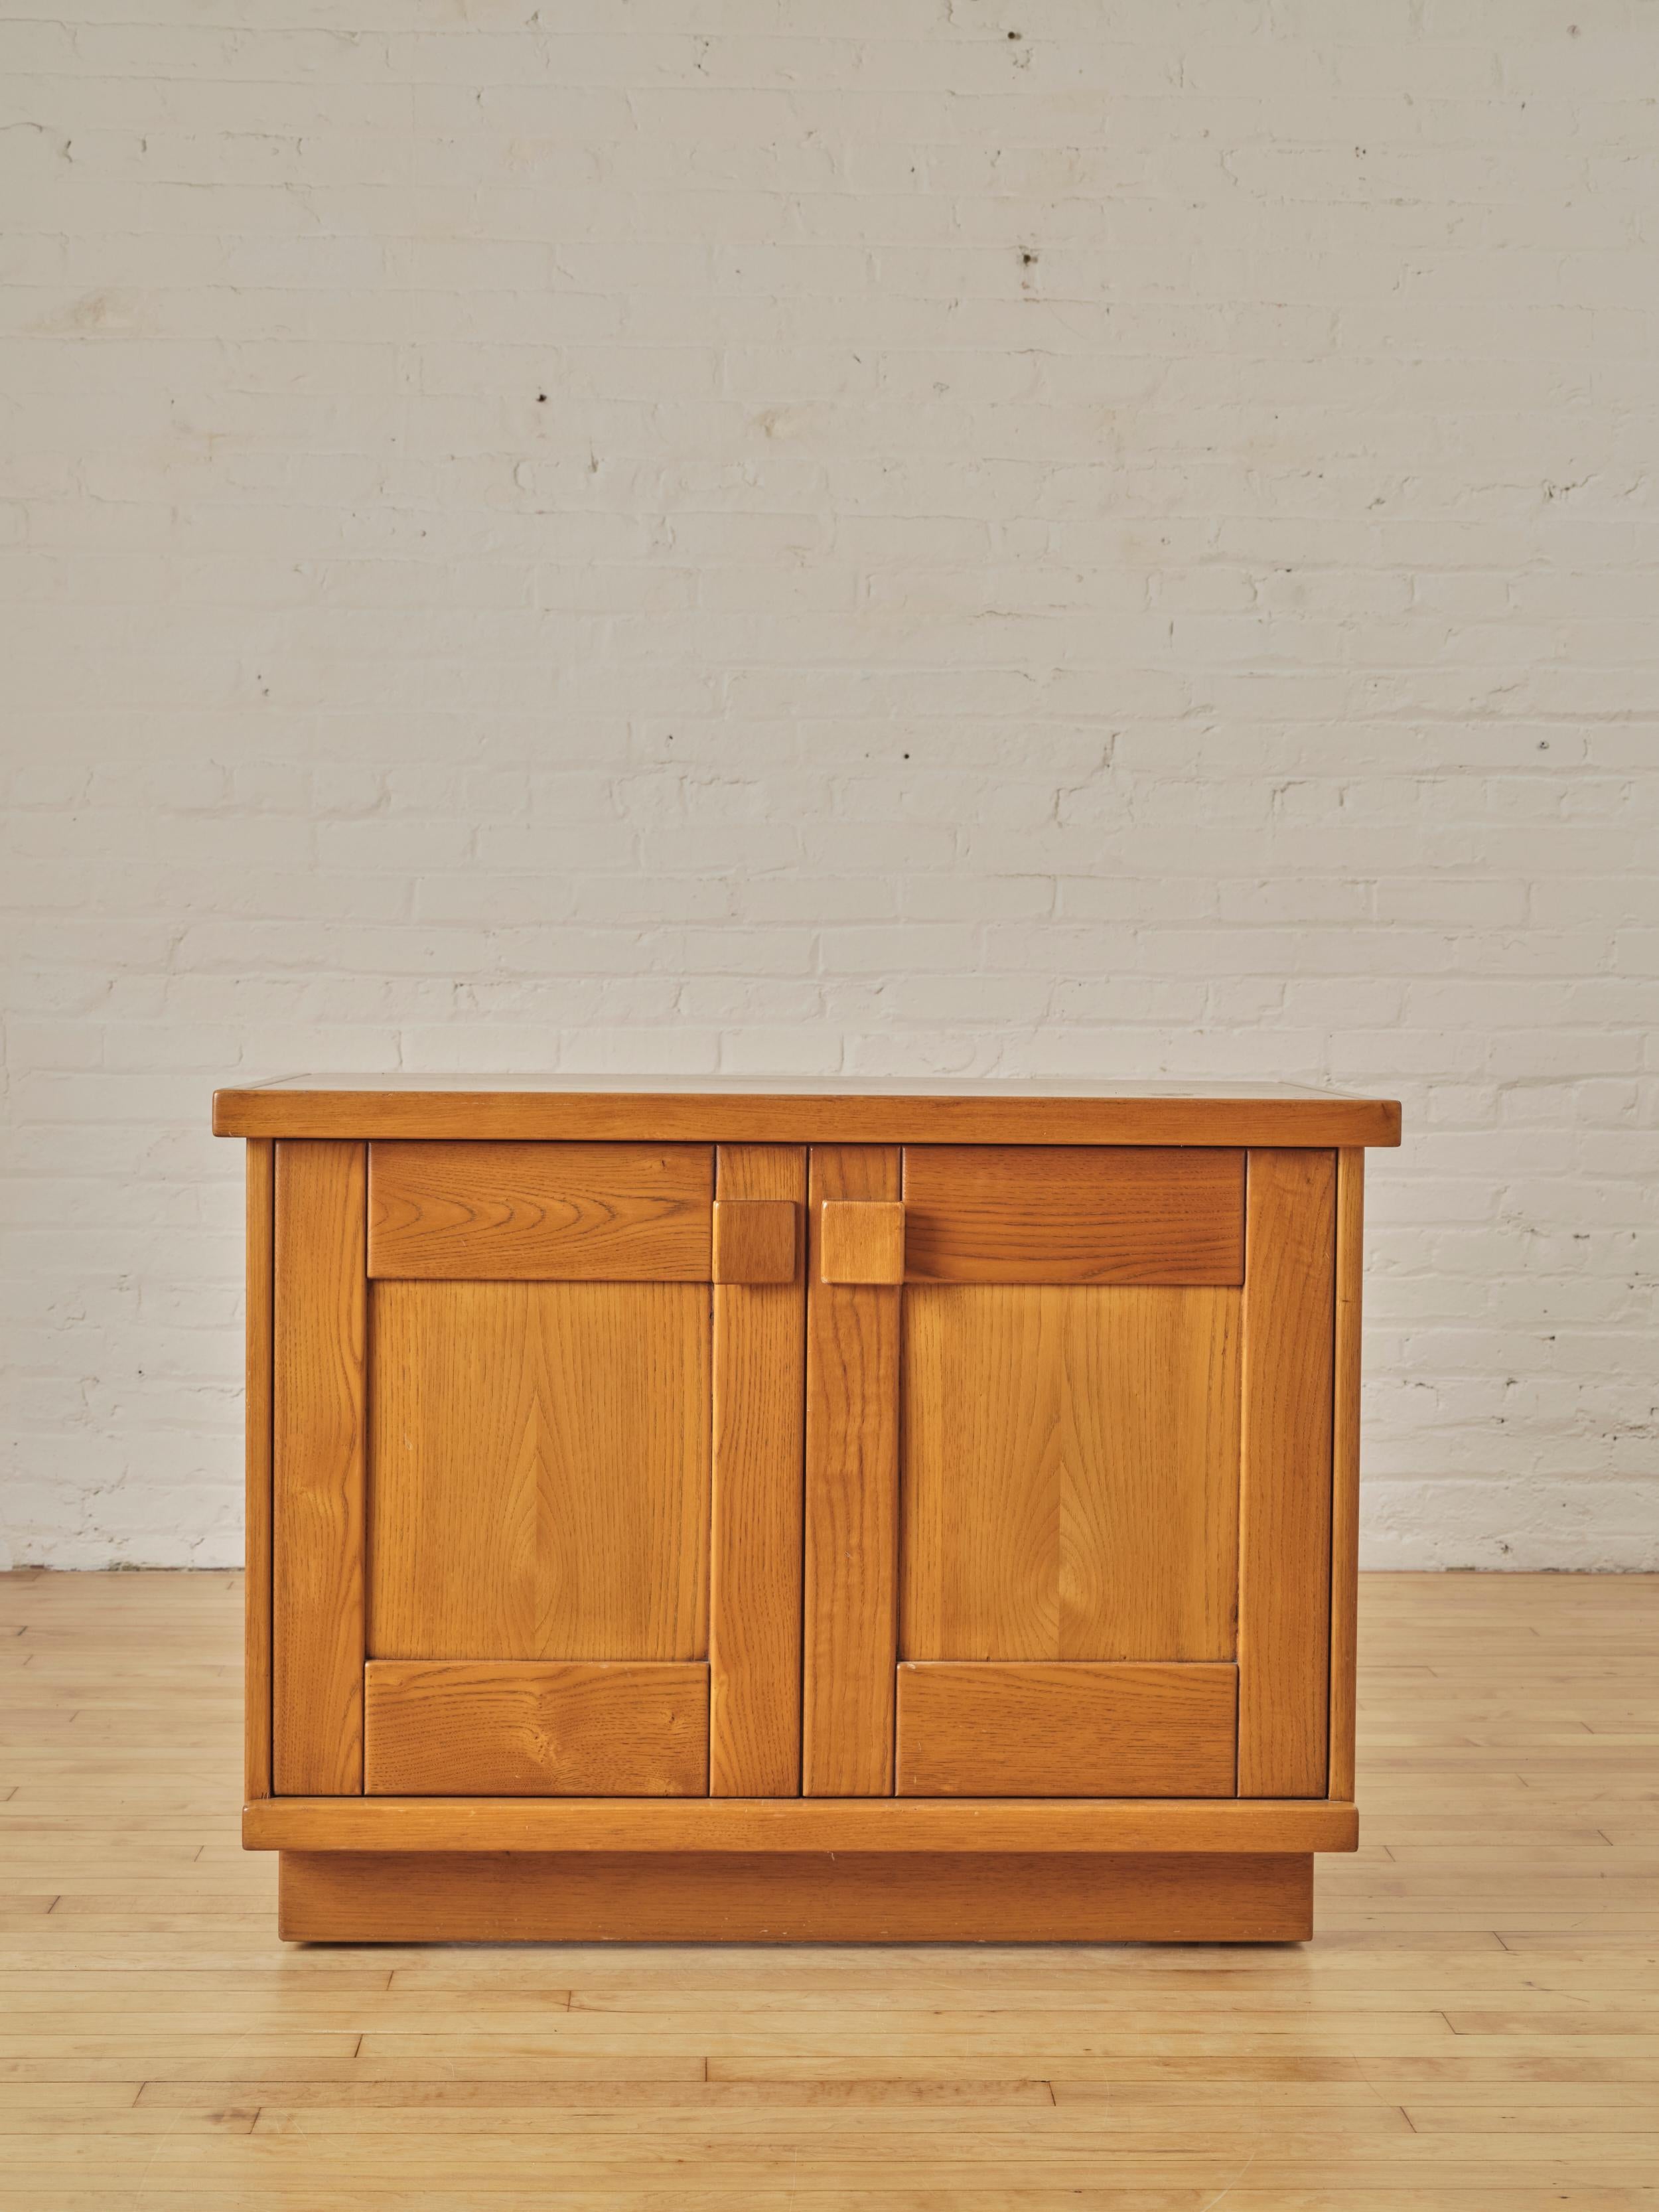 French Sideboard by Maison Regain in elm wood, featuring three doors with sculptural pulls that open up to reveal single shelving.

